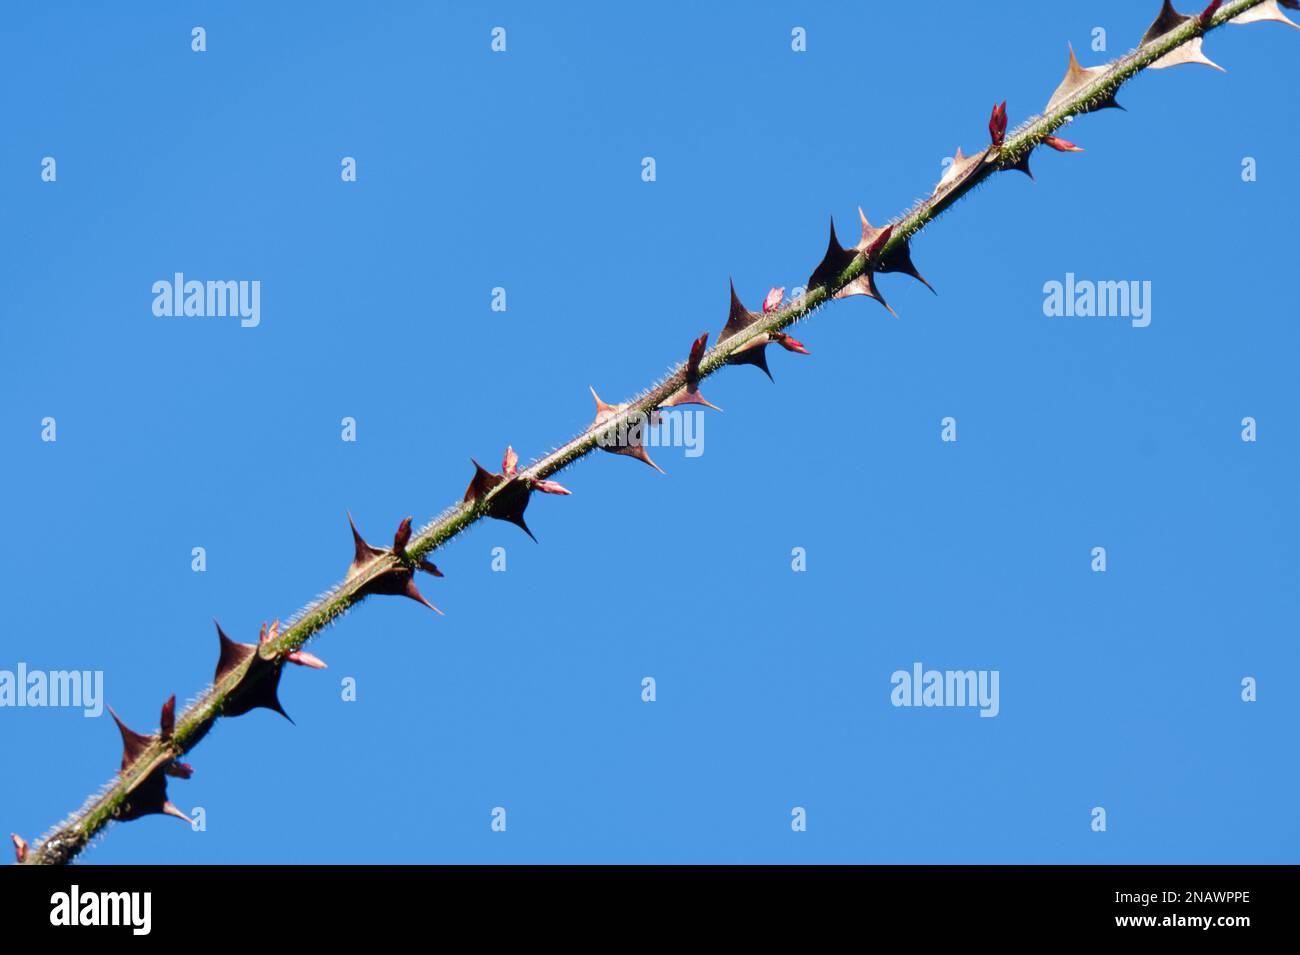 The large spikes or thorns on a winter stem of wingthorn rose Rosa sericea omeiensis pteracantha in UK garden February Stock Photo